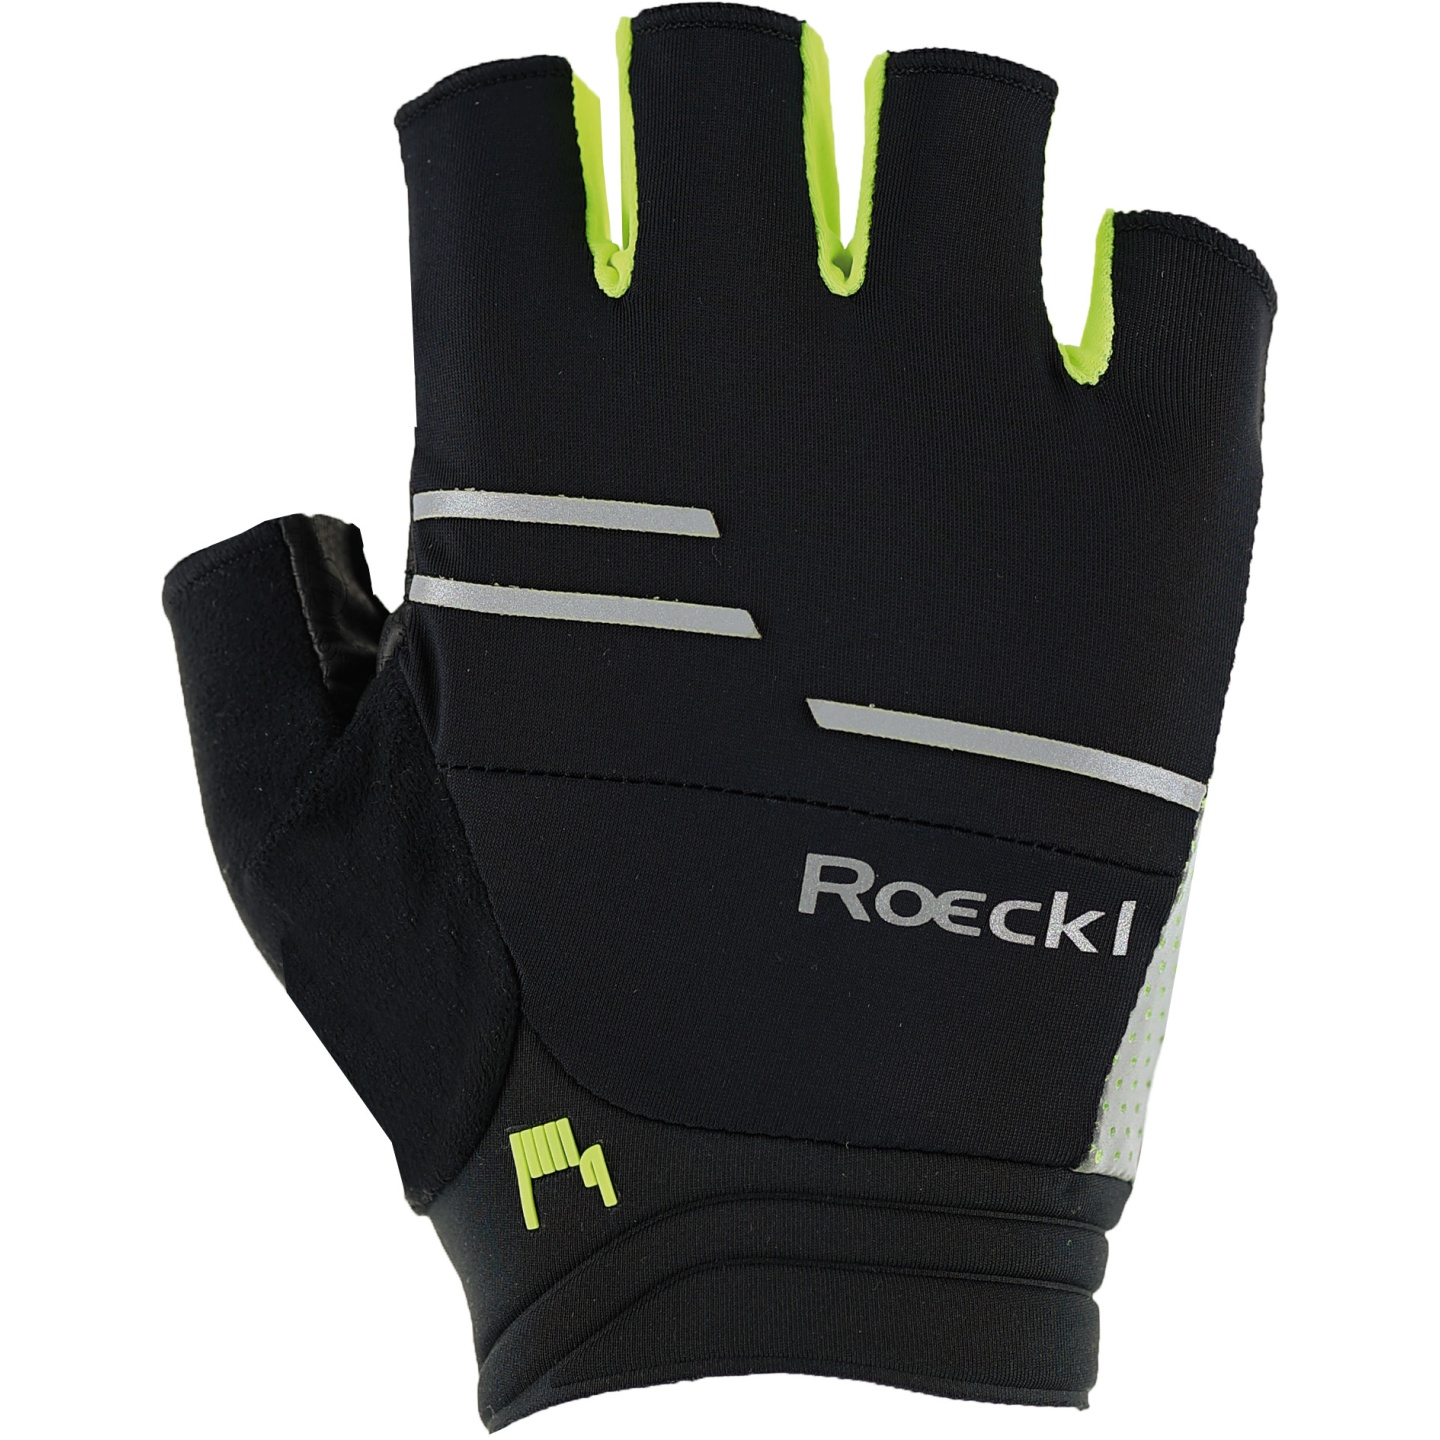 Picture of Roeckl Sports Iguna Cycling Gloves - black/fluo yellow 9210